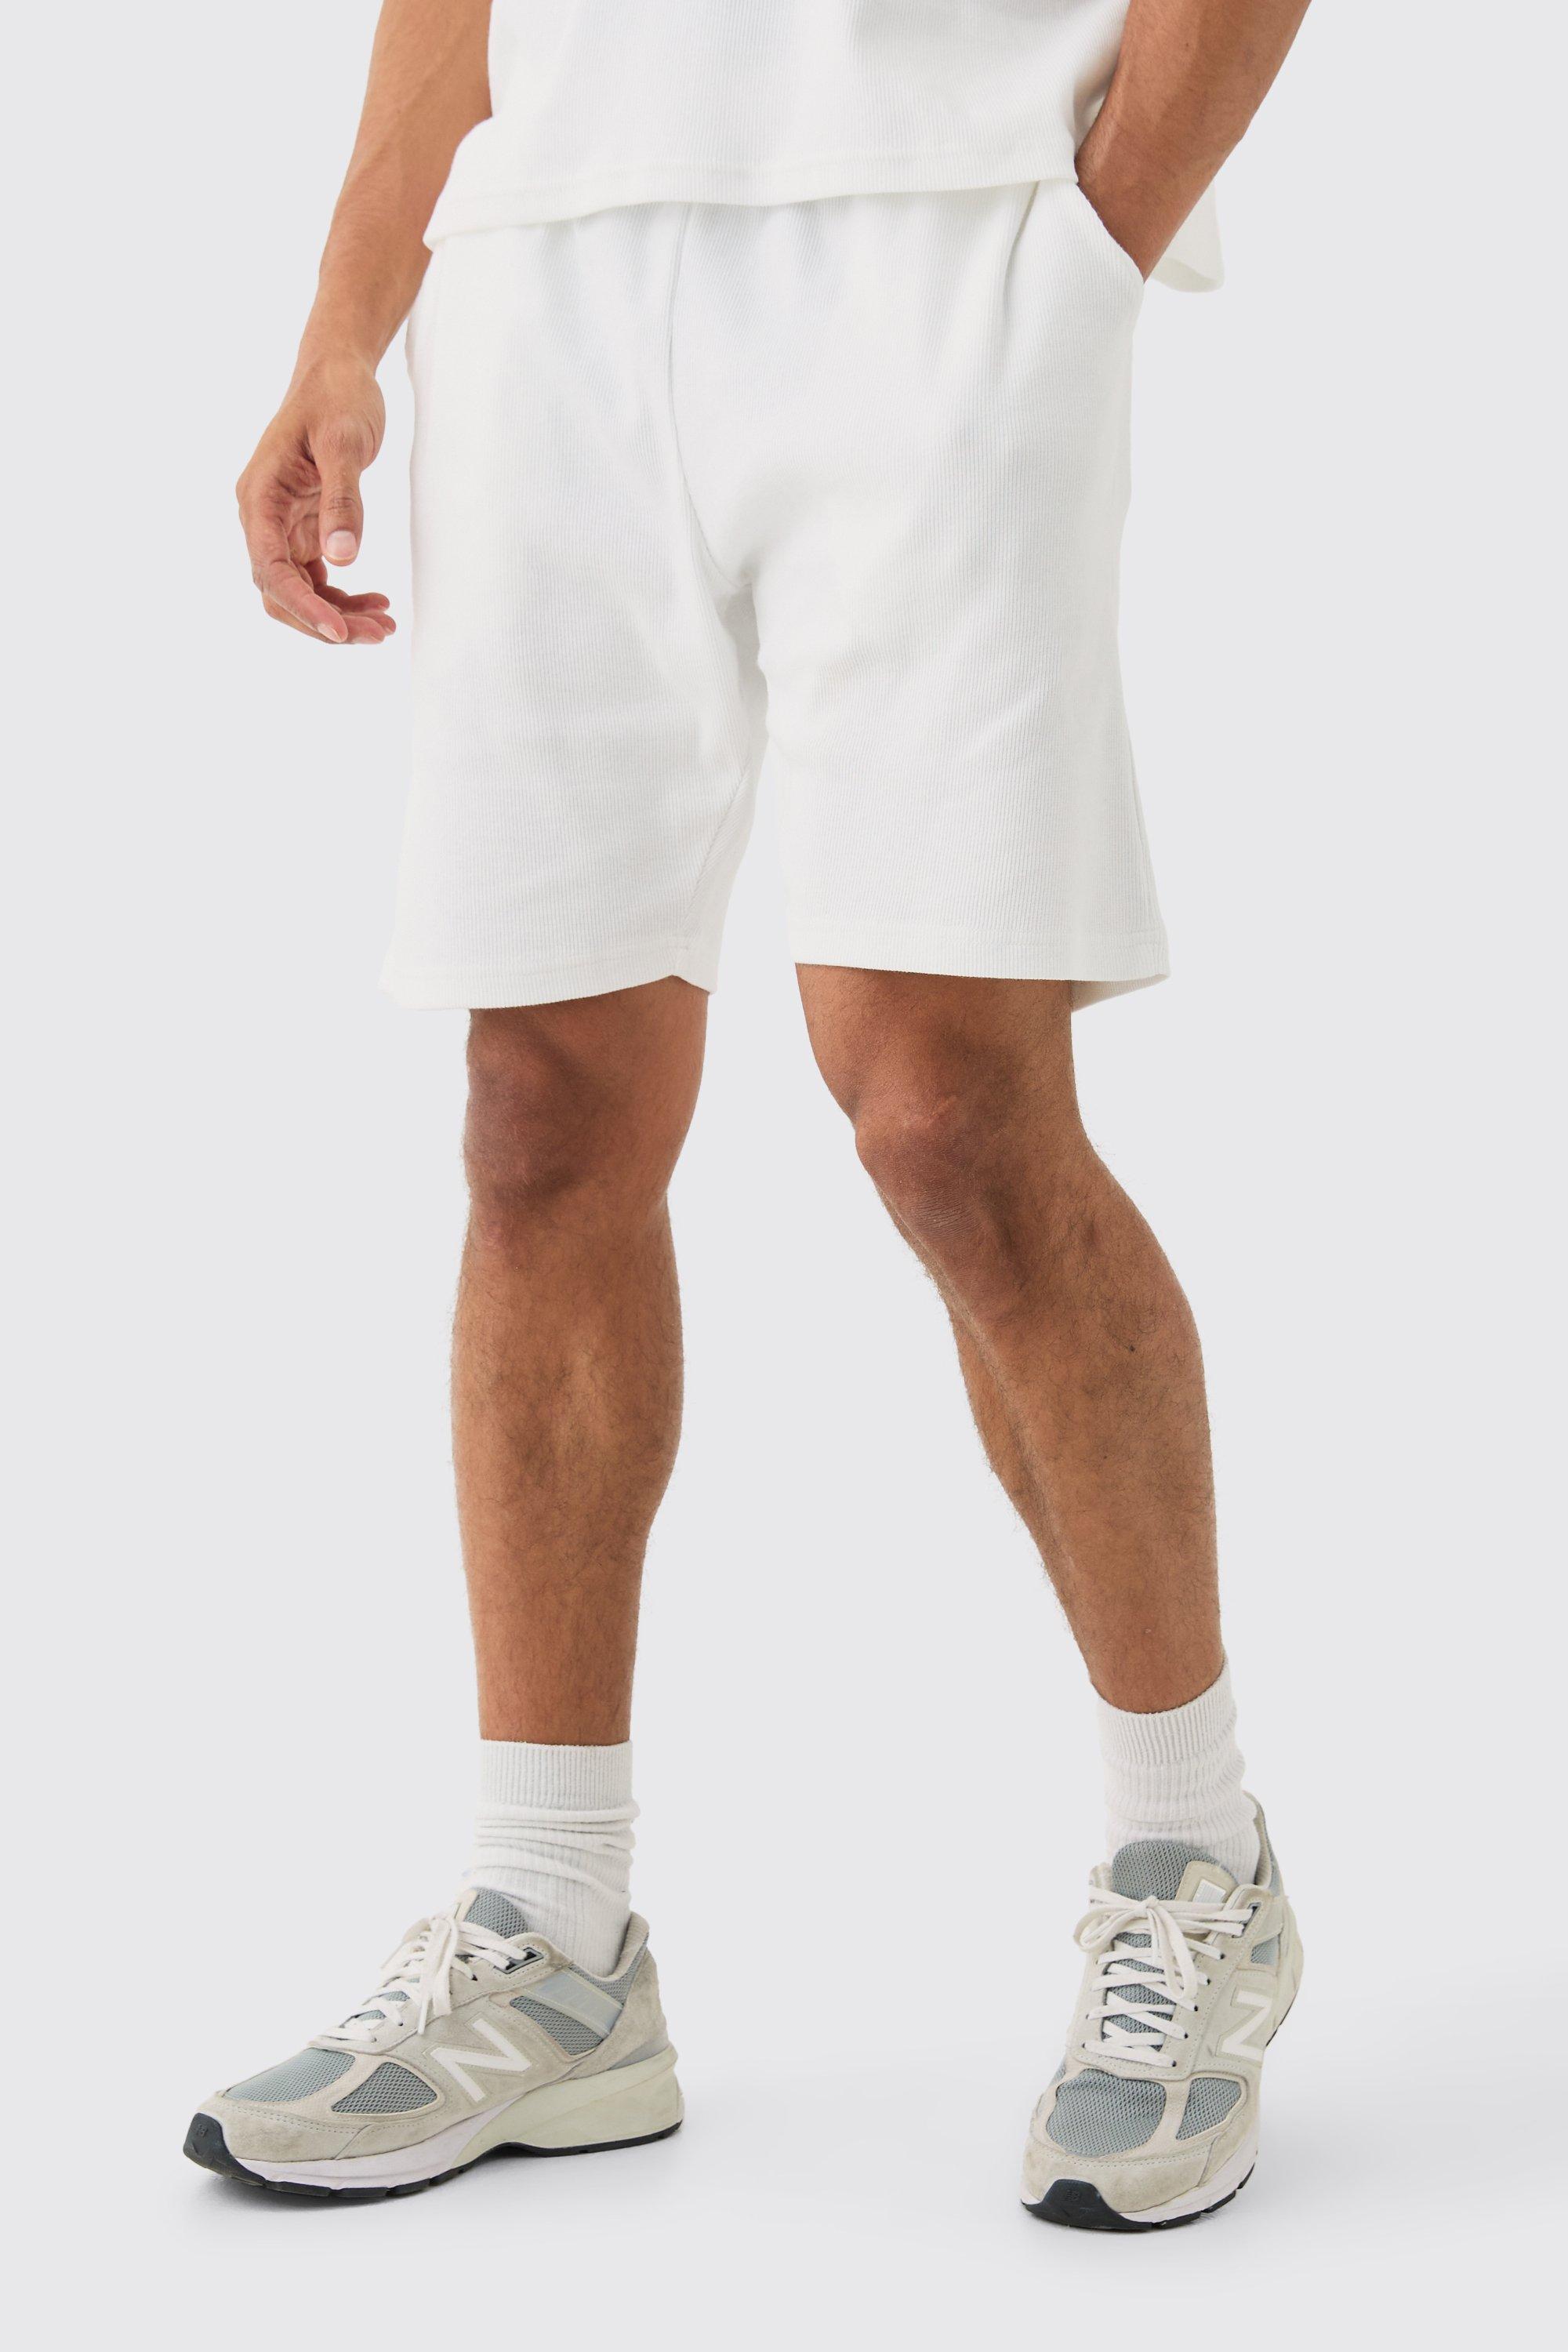 Image of Loose Fit Mid Length Heavyweight Ribbed Shorts, Cream